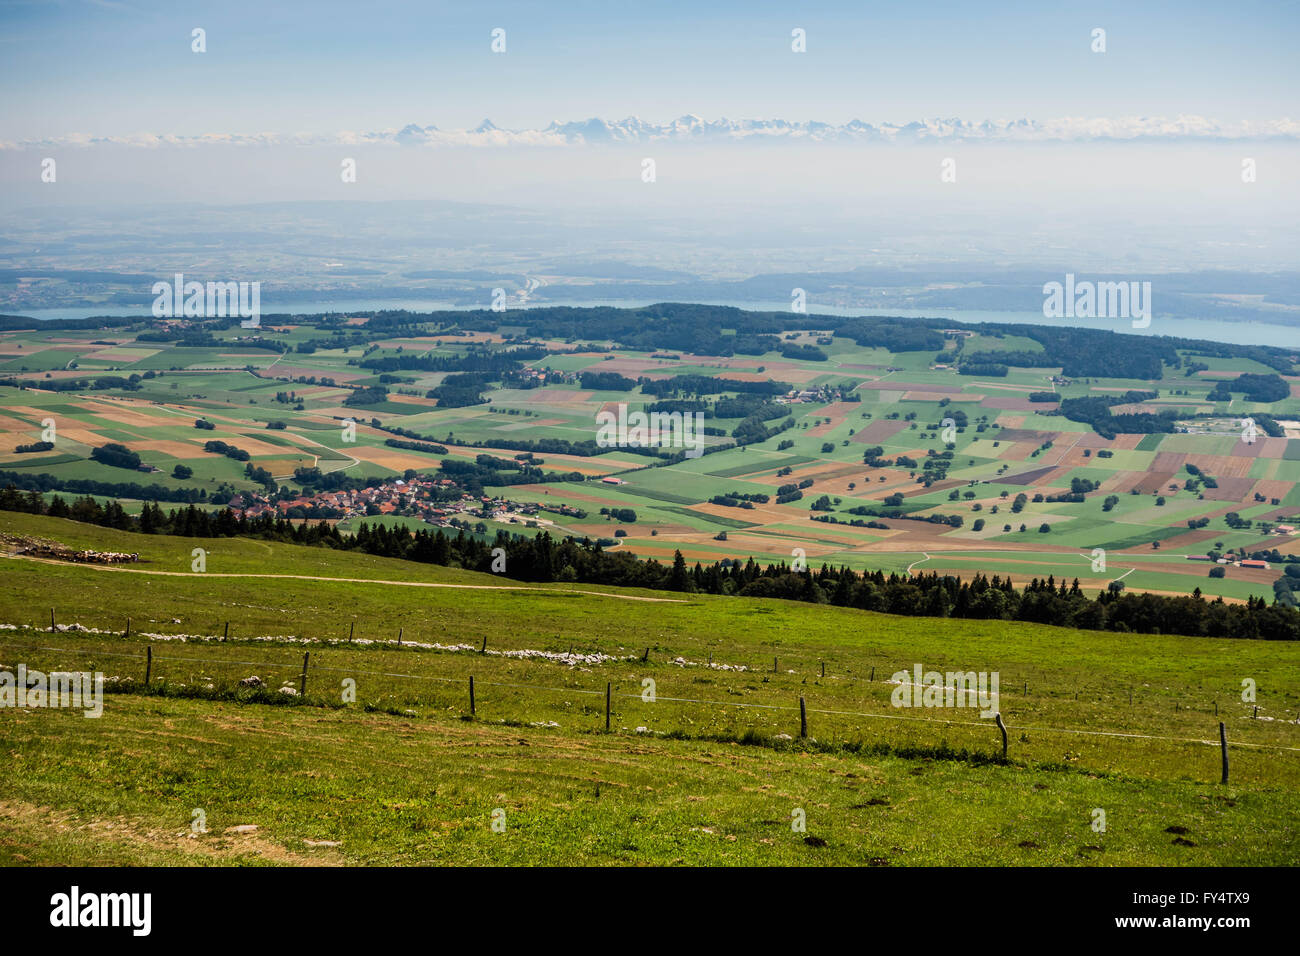 Switzerland, Jura, view from above on Alps Stock Photo